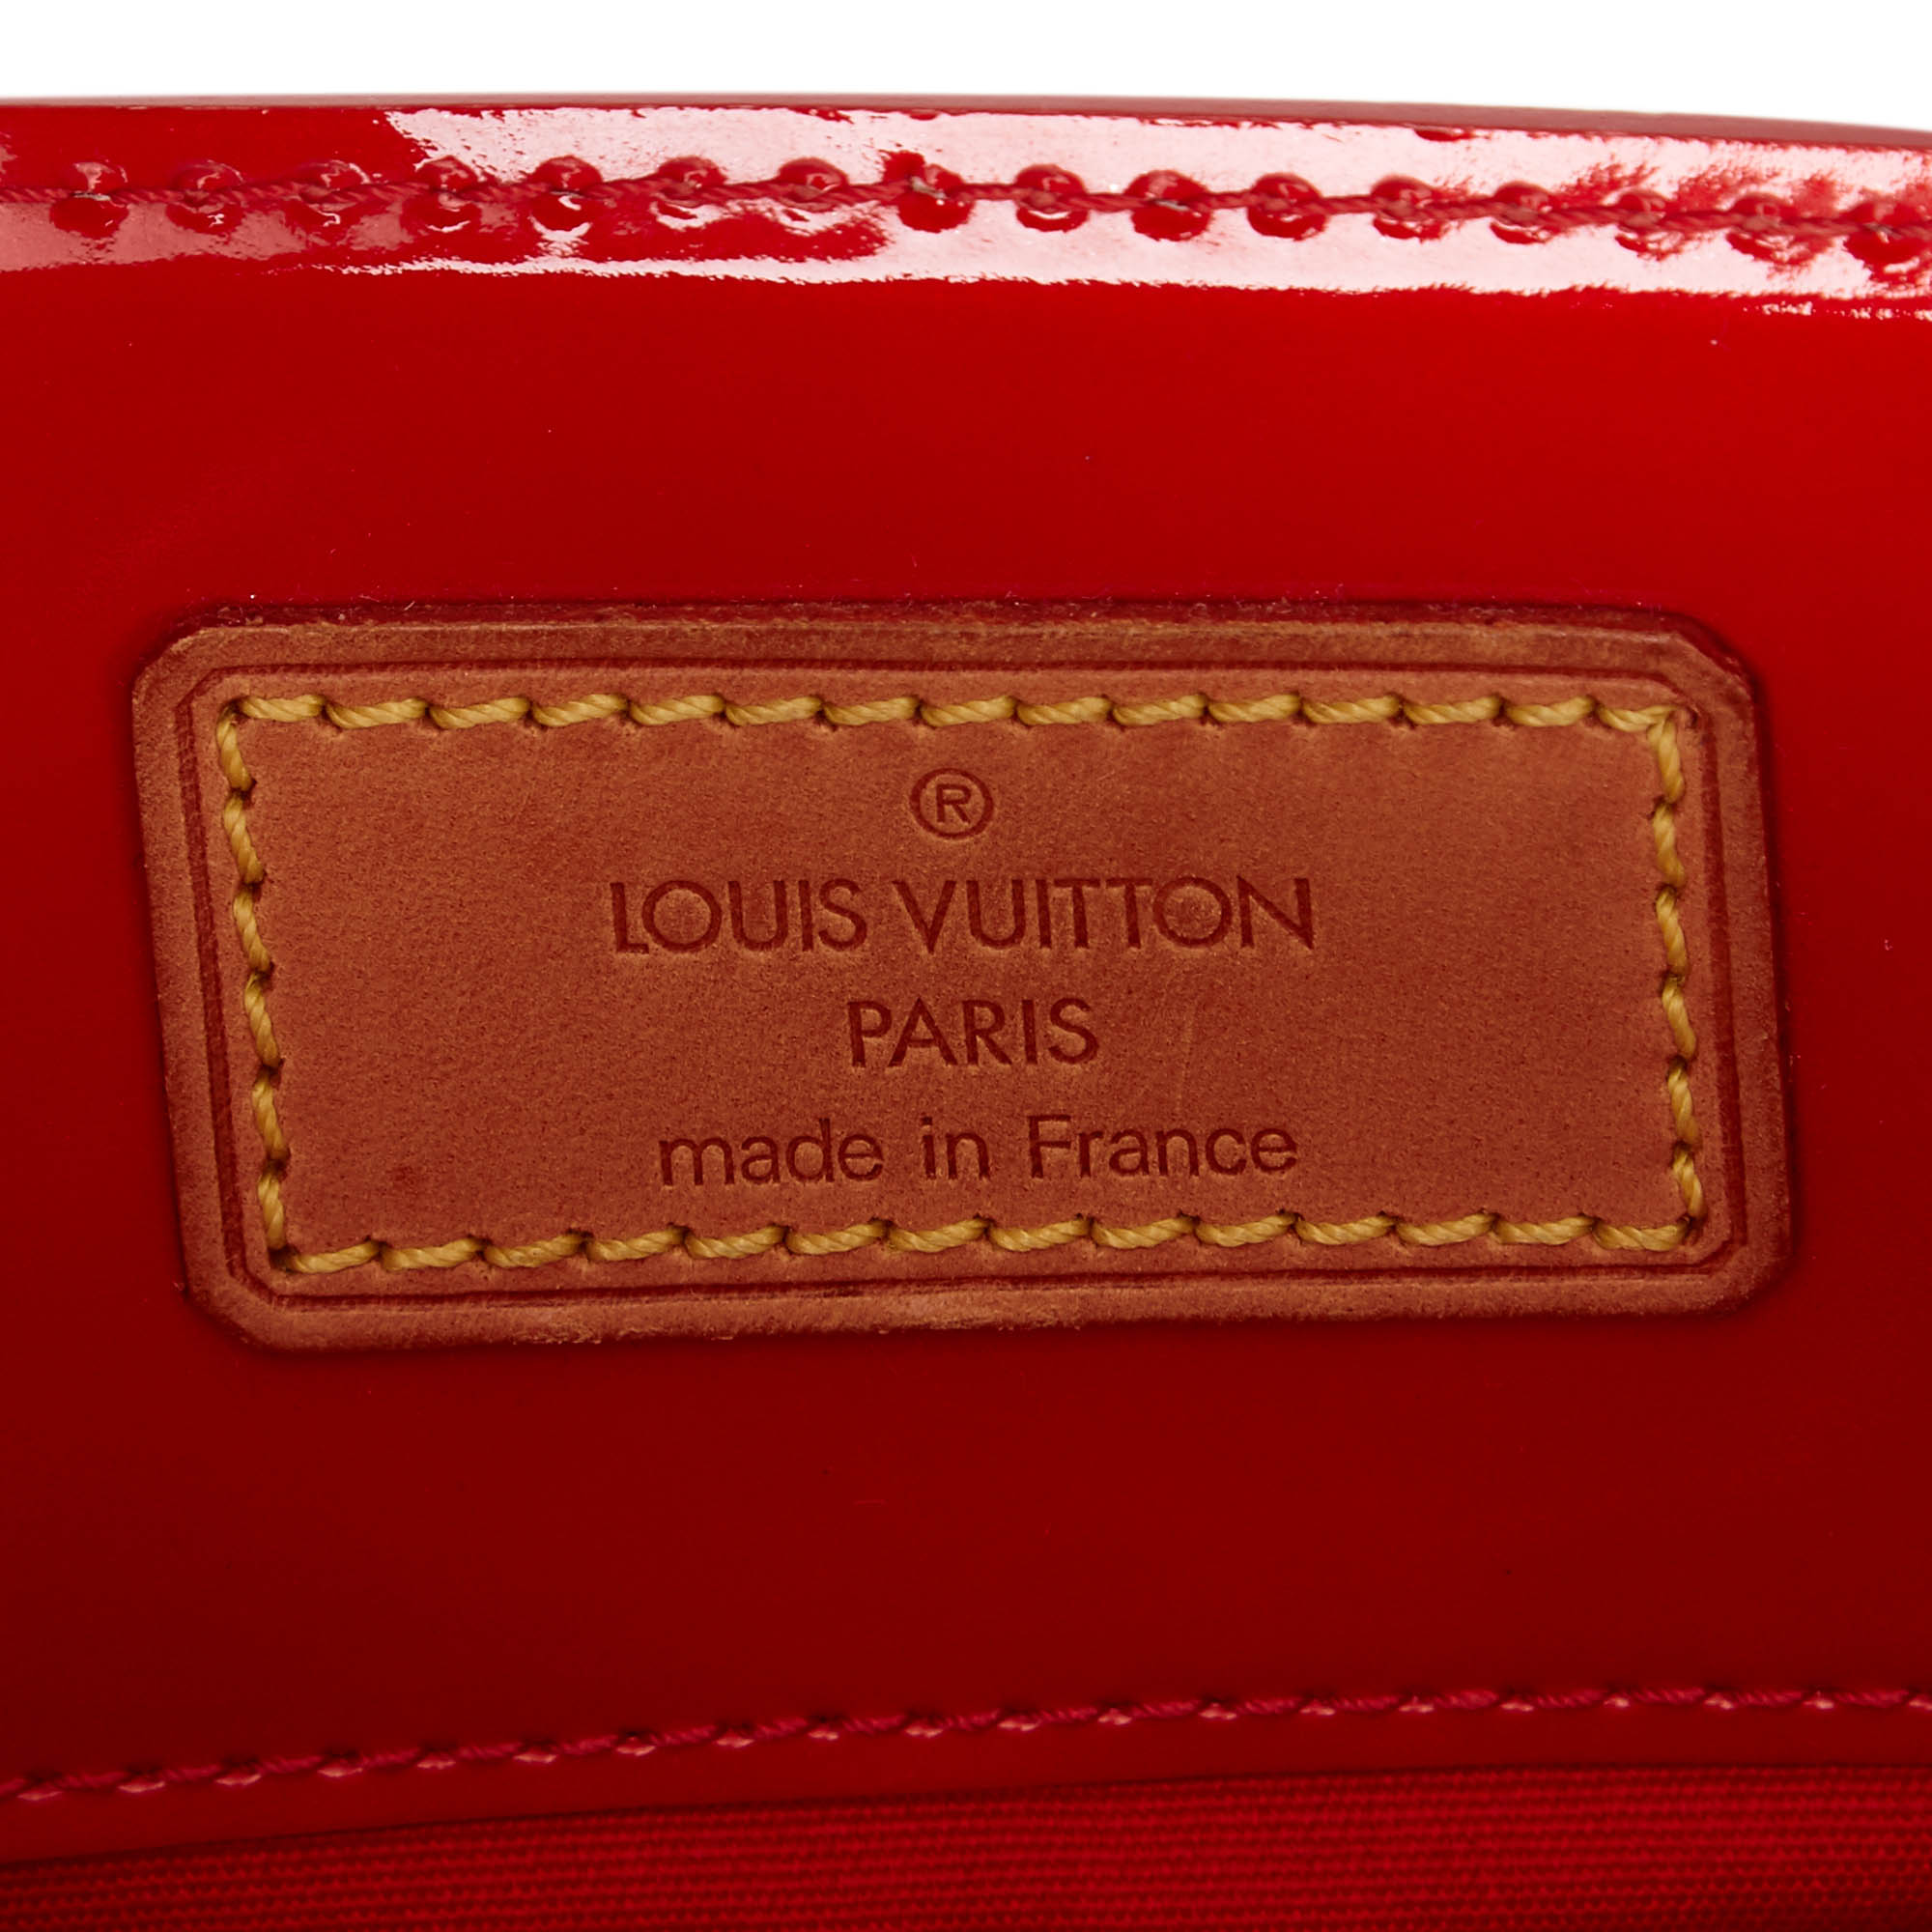 Red color LV vernis always makes girls falling for🩷🩷 Louis